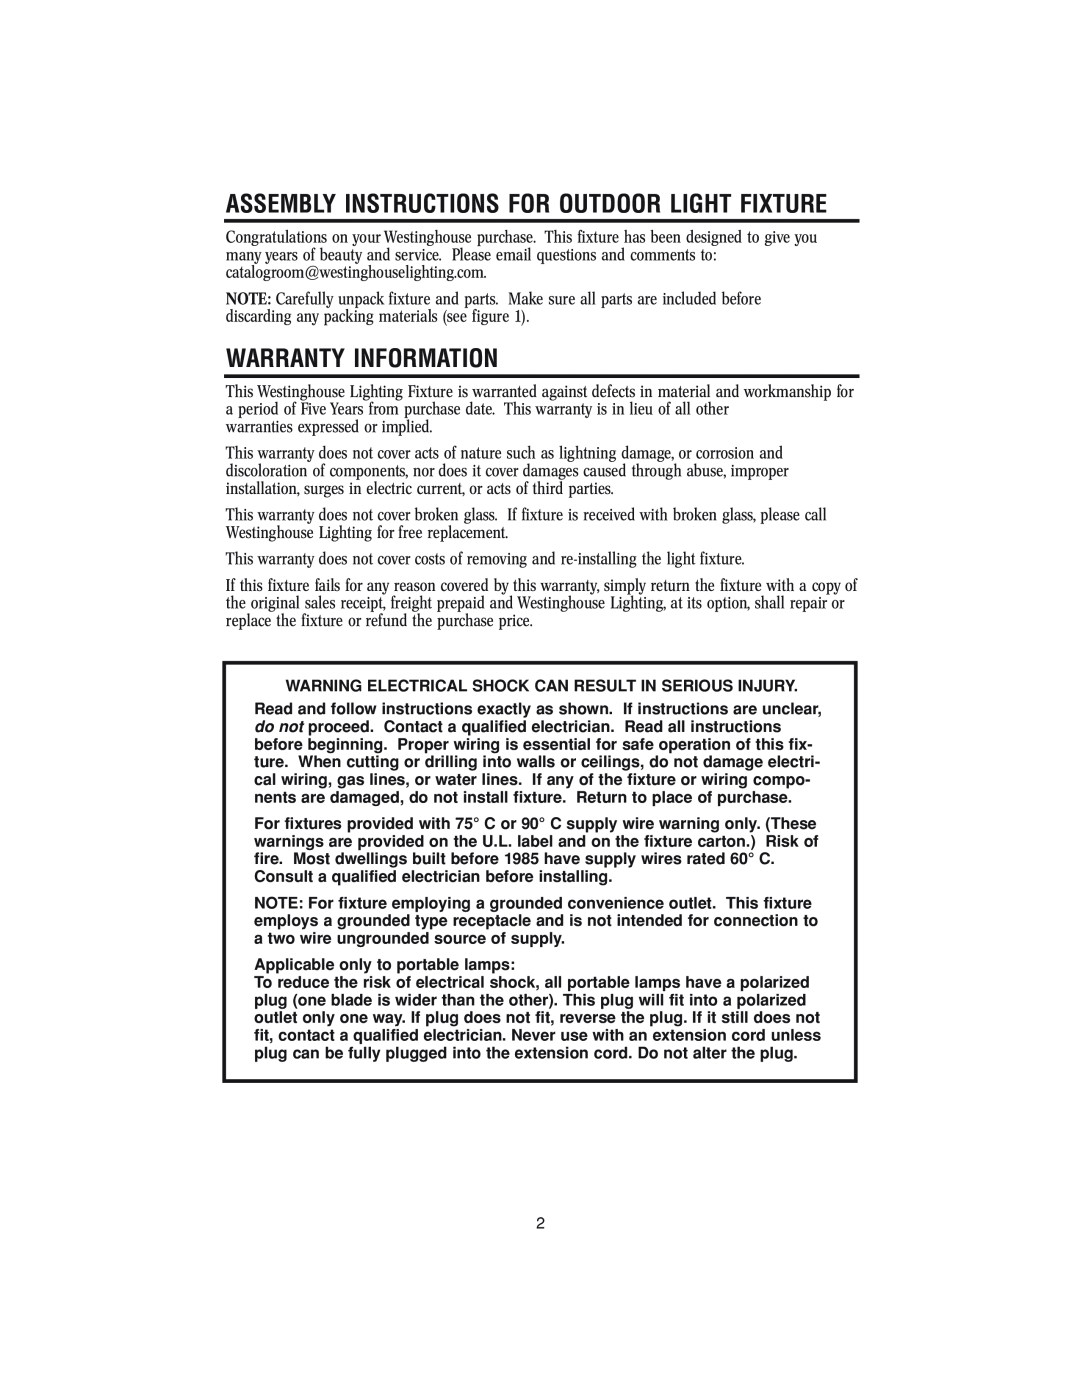 Westinghouse w-143 owner manual Warranty Information, Assembly Instructions For Outdoor Light Fixture 